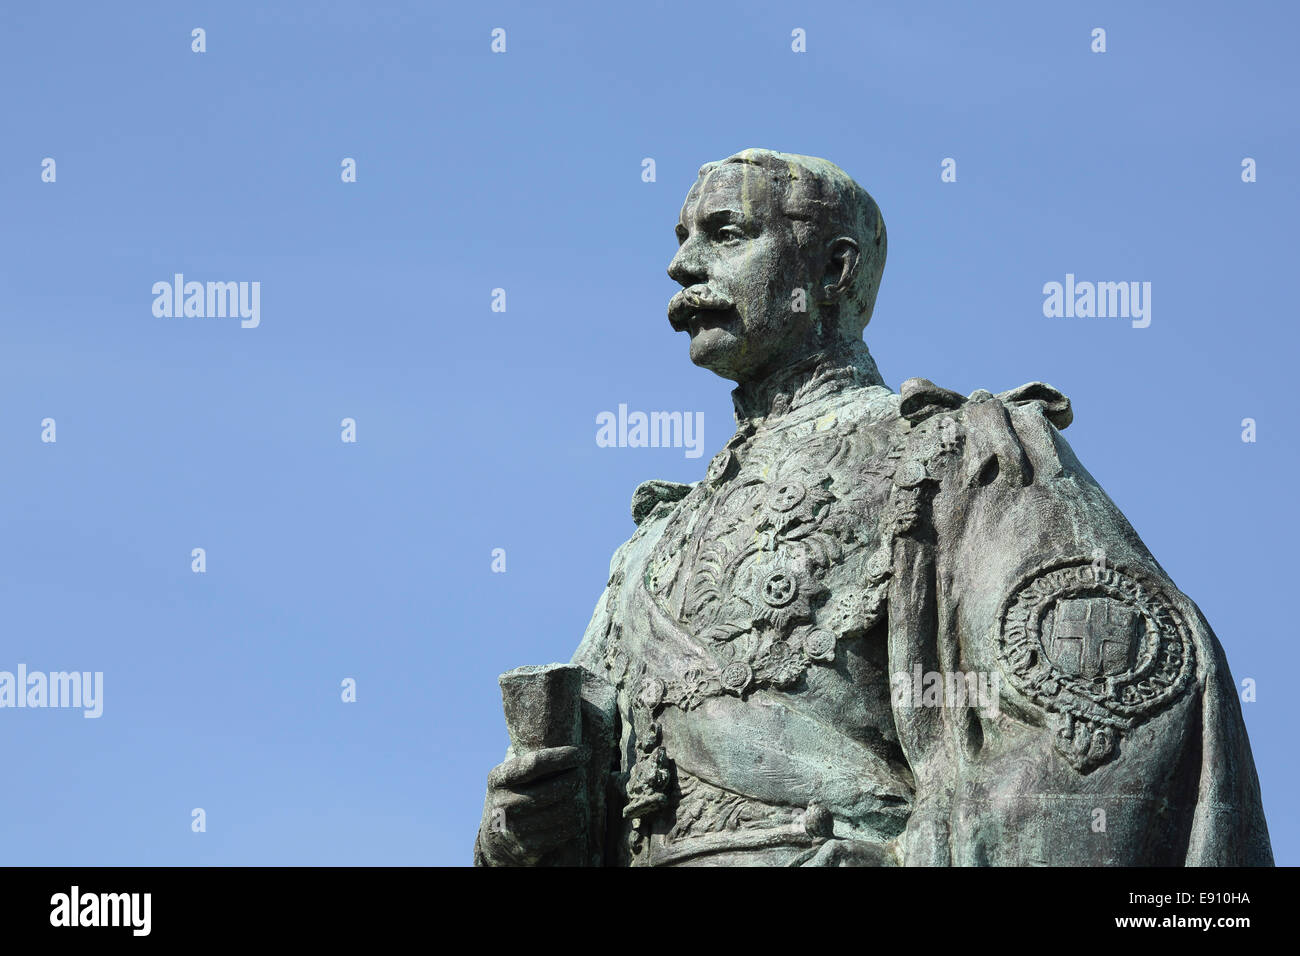 Statue of Lord Londonderry in Seaham, County Durham, England. Stock Photo